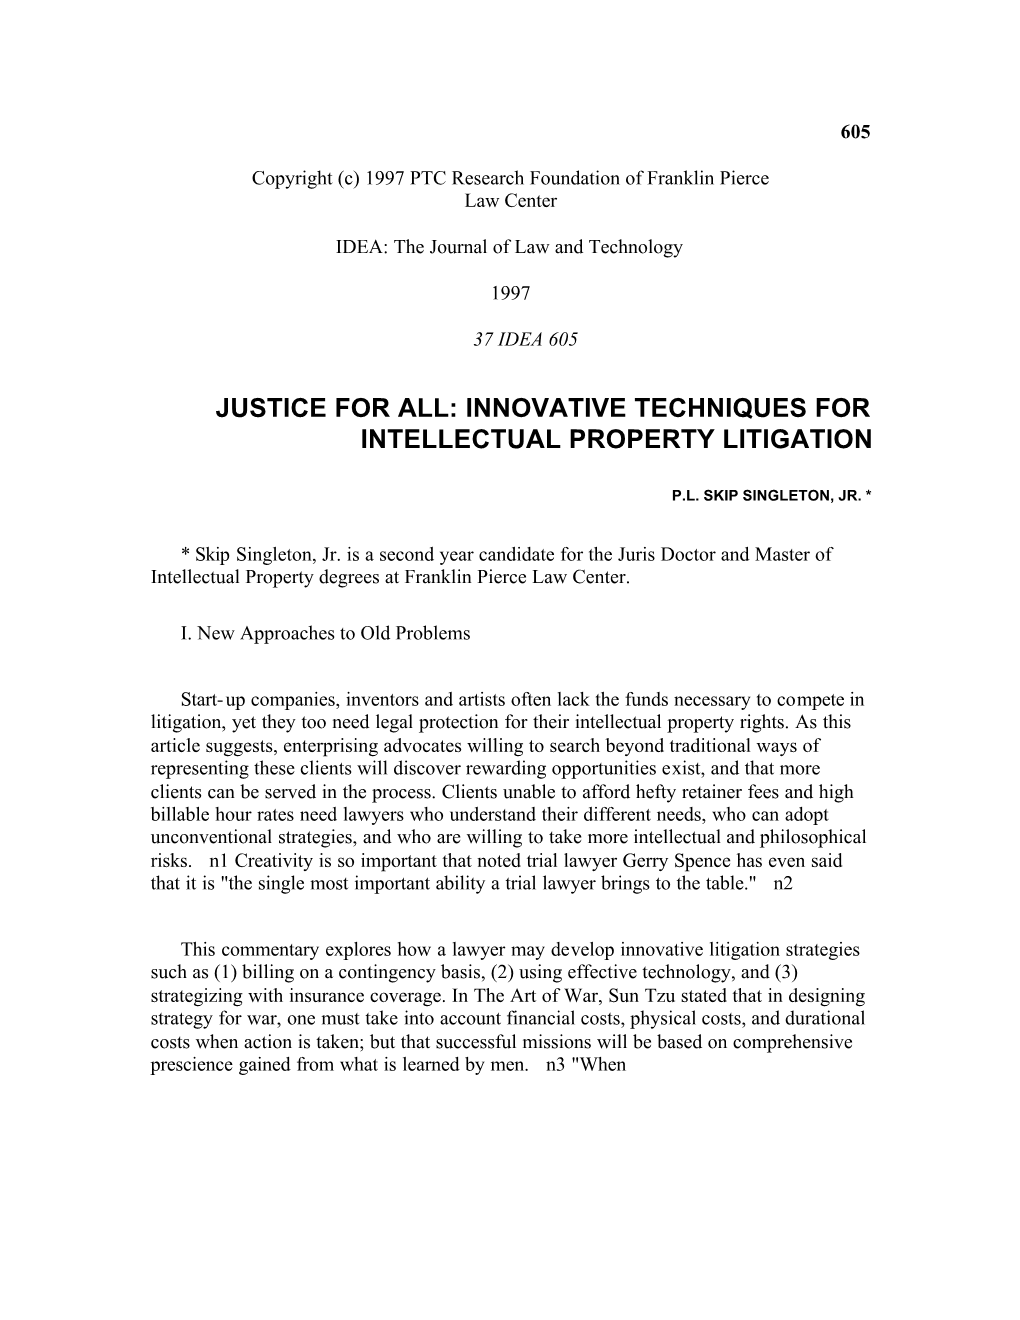 Justice for All: Innovative Techniques for Intellectual Property Litigation